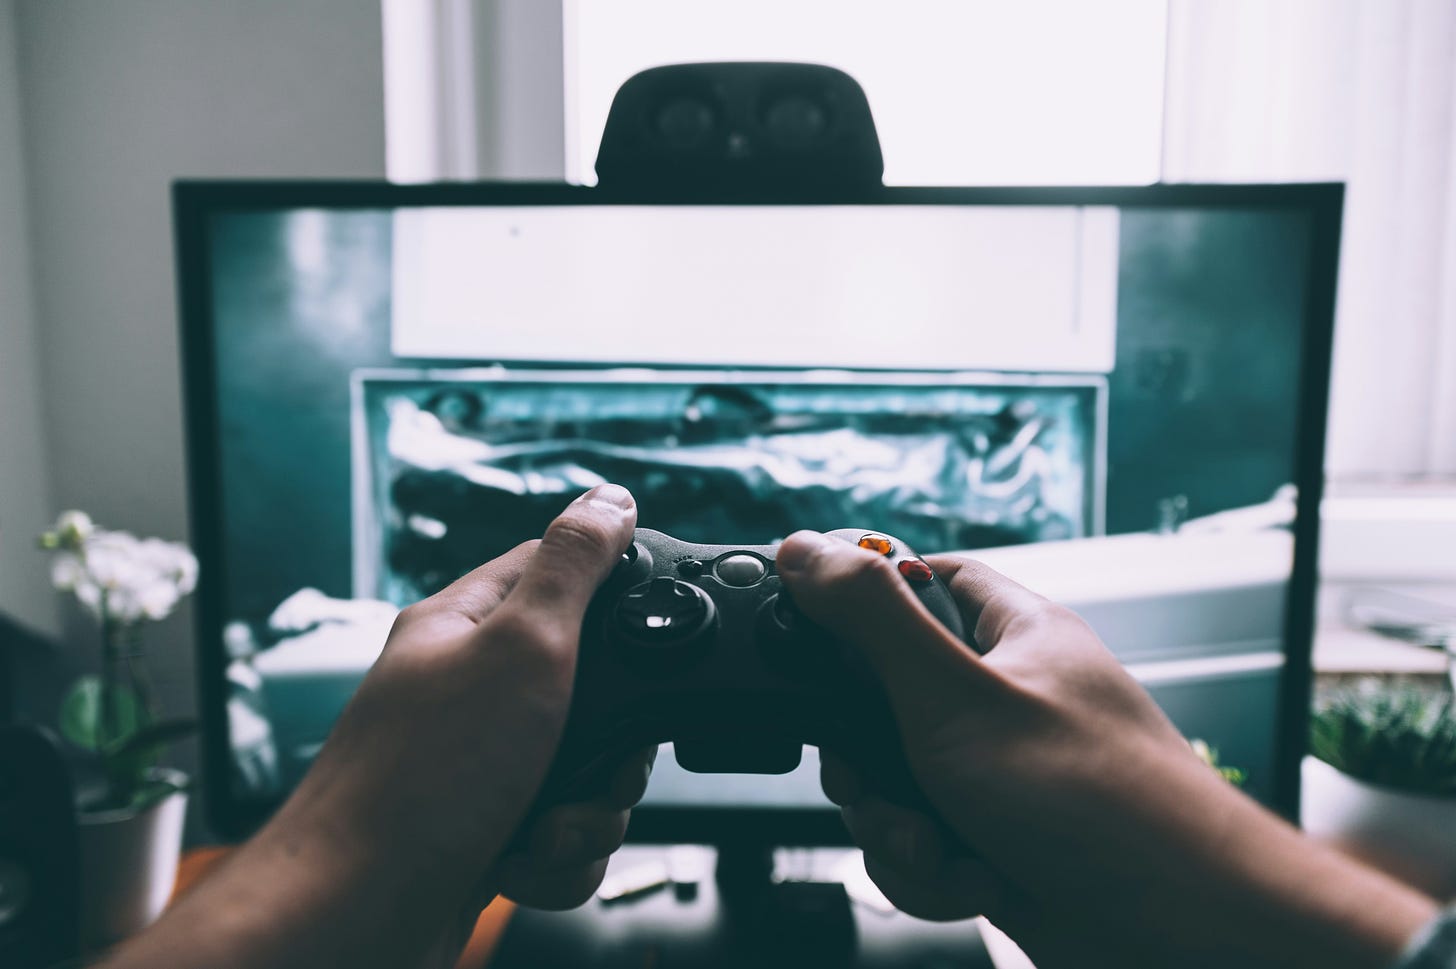 Photo of a person's hands holding a video game controller